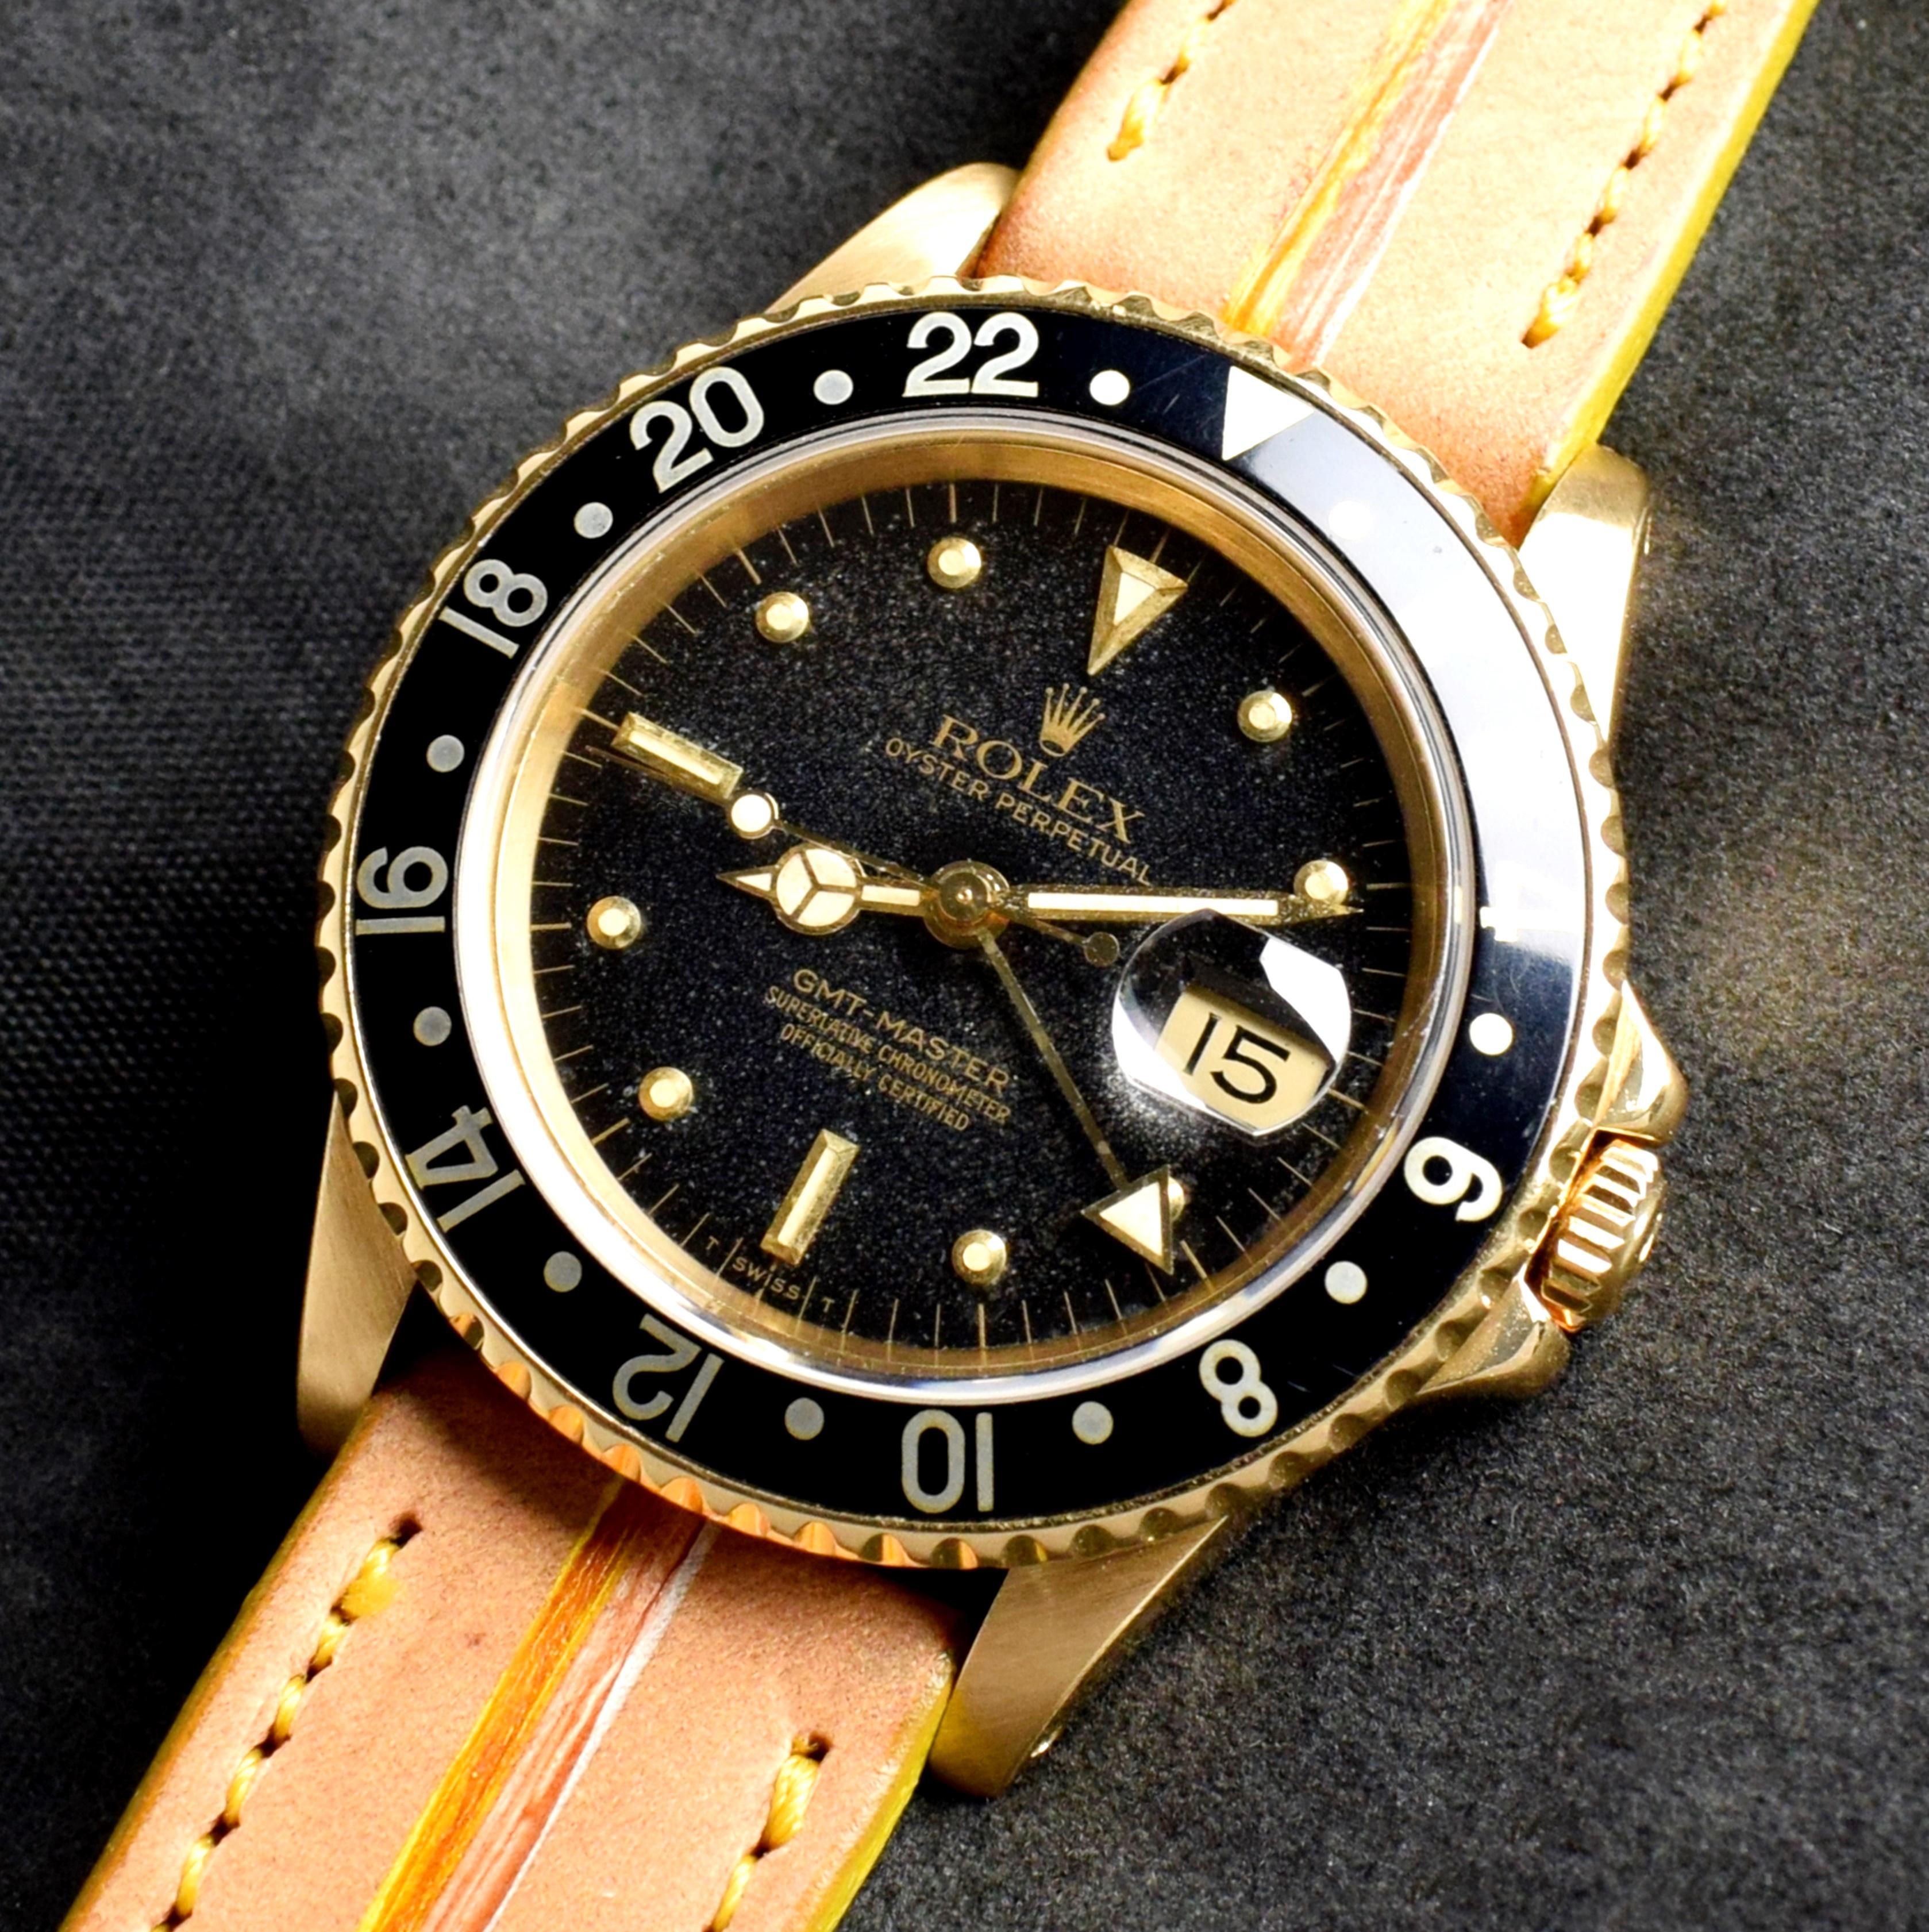 Brand: Vintage Rolex
Model: 16758
Year: 1983
Serial number: 81xxxxx
Reference: C03700

Case: 18K Yellow Gold 40mm case in diameter without crown shows sign of wear with slight polish from previous; inner case back stamped 16750

Dial: Excellent